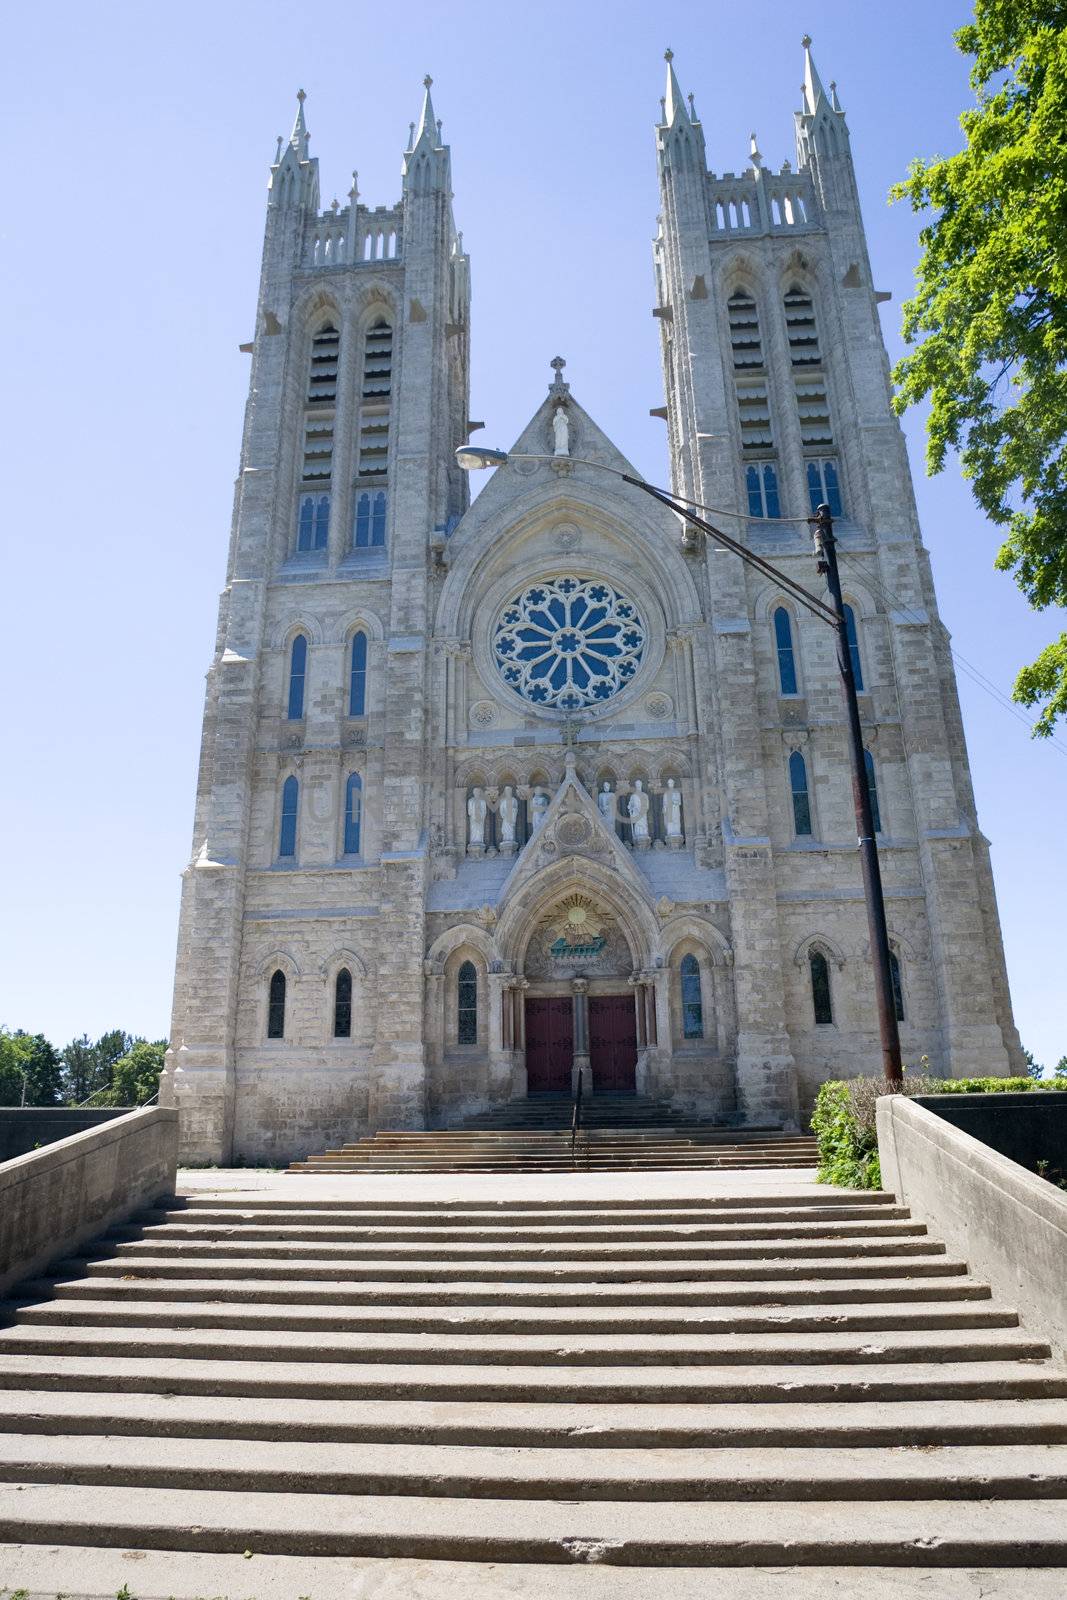 Looking up at the Church of Our Lady. Guelph, Ontario, Canada